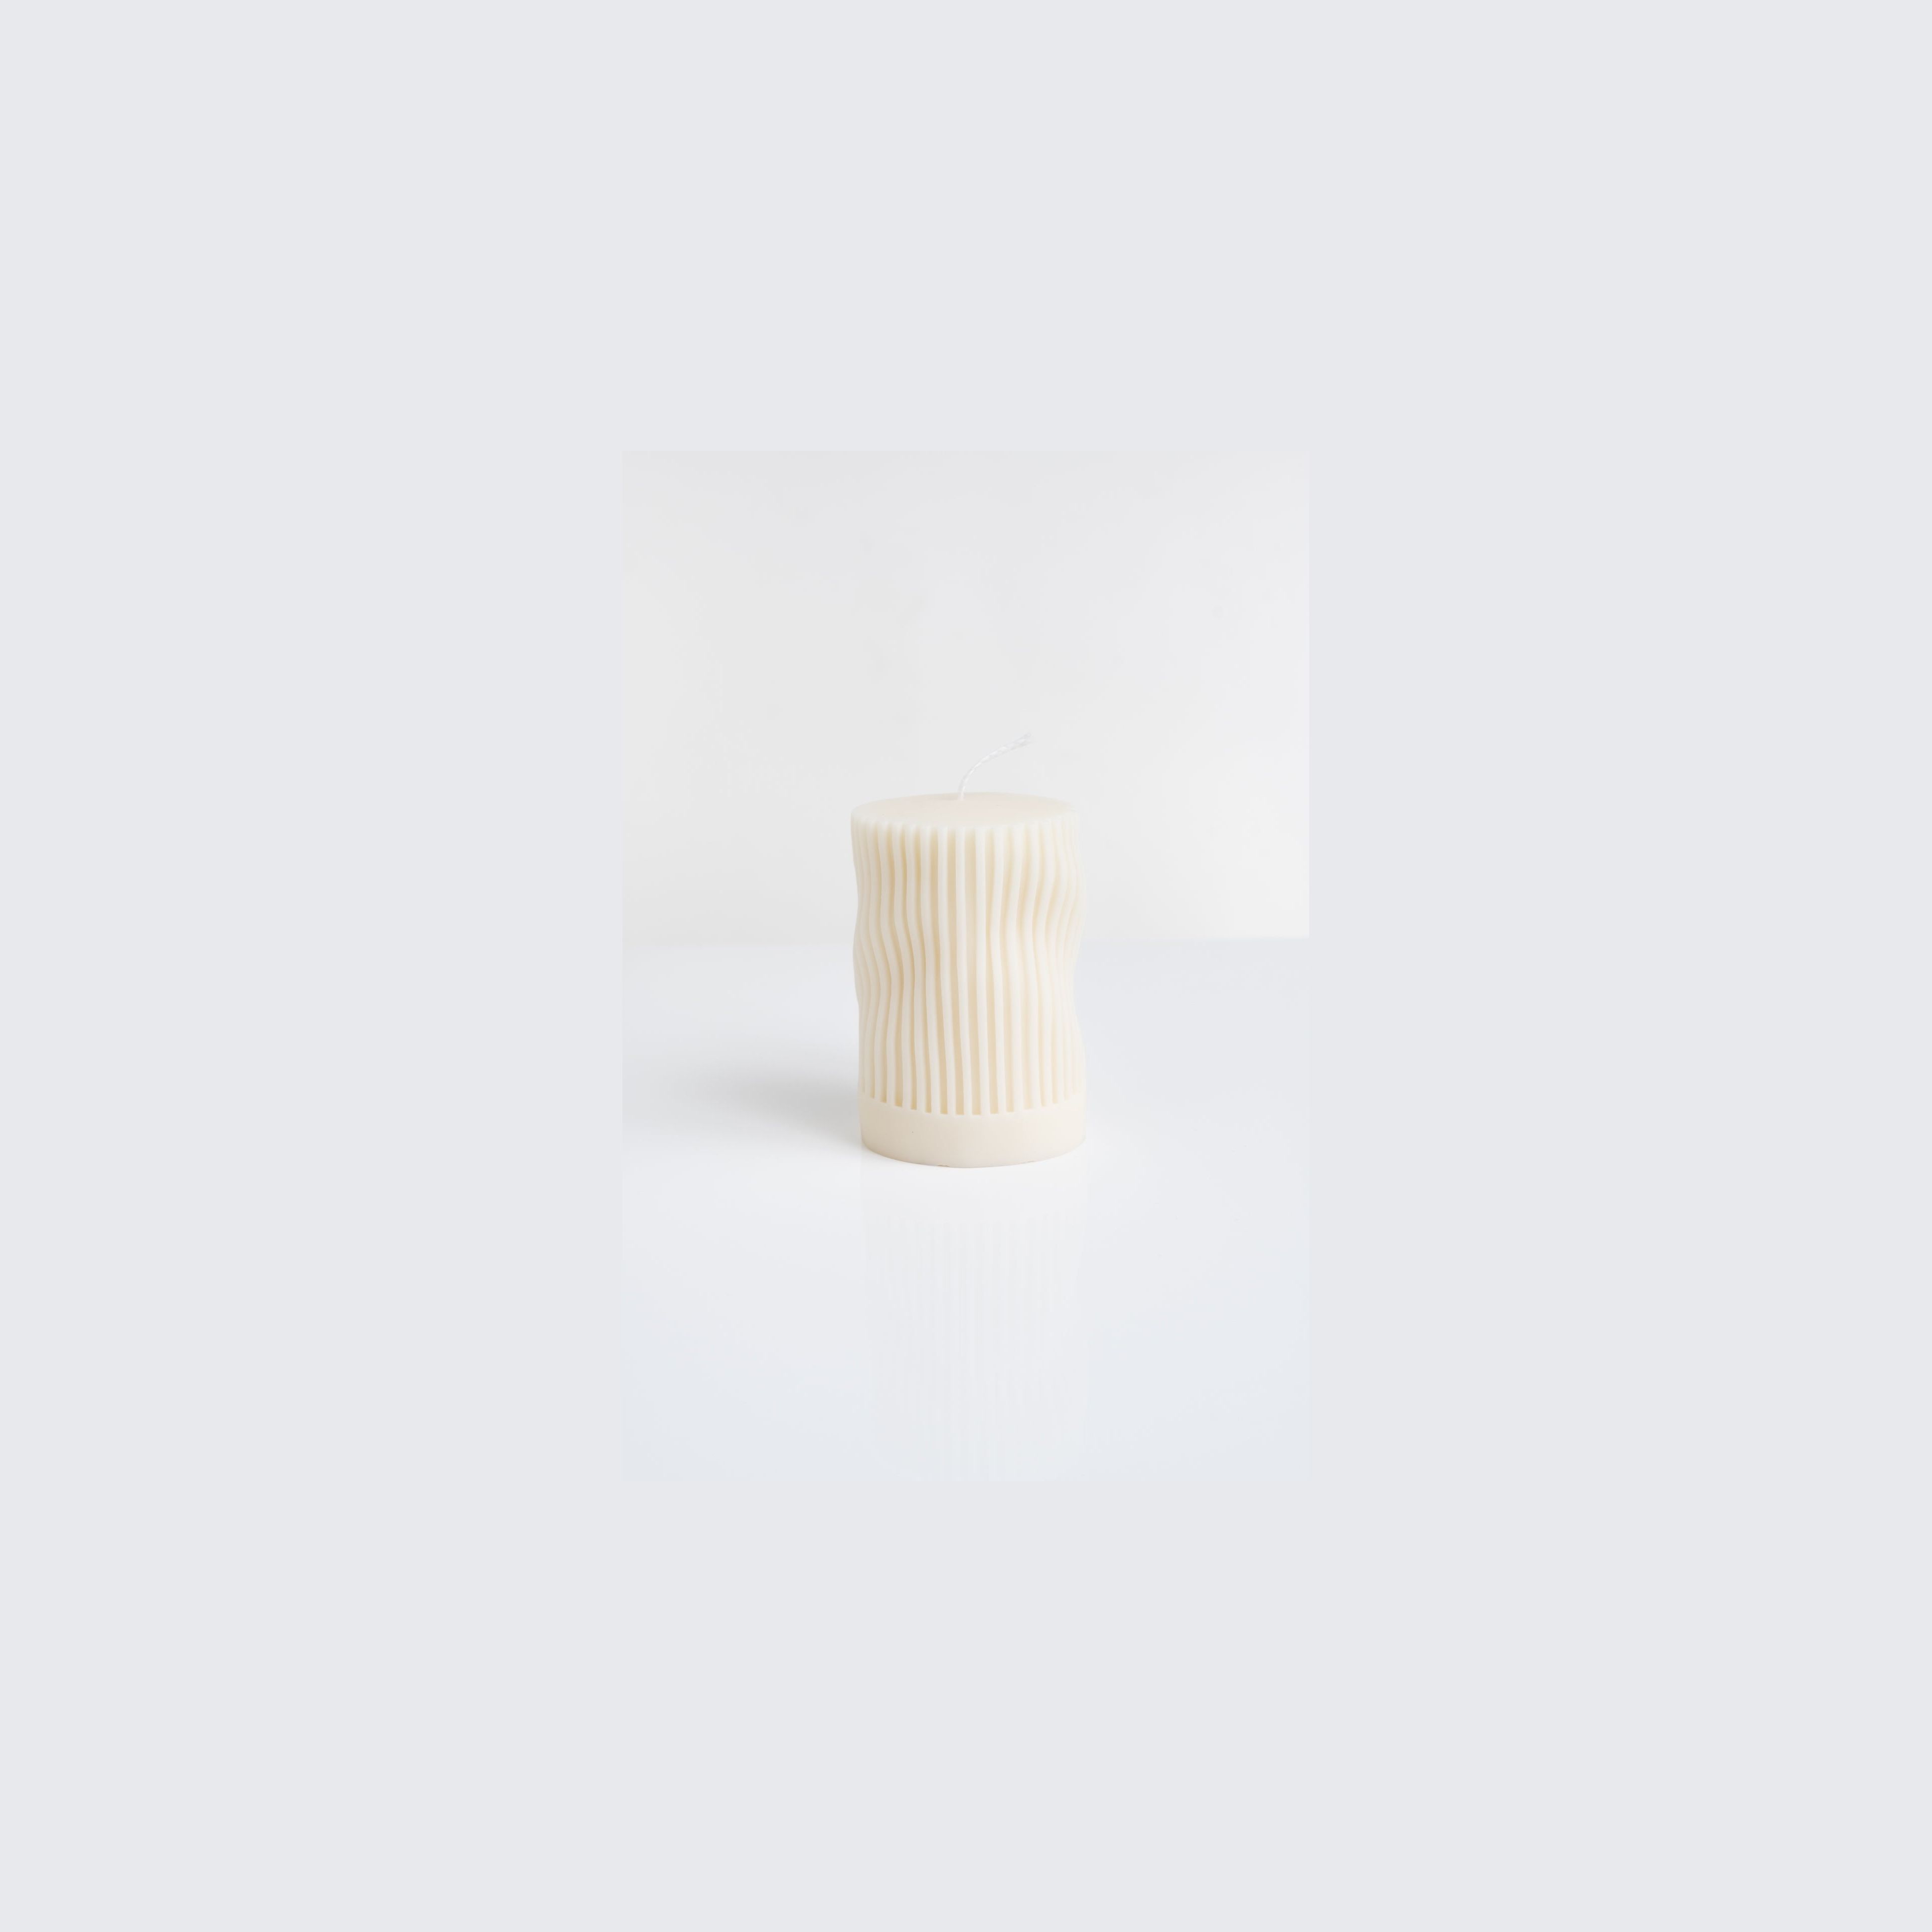 Fall/Winter Collection Shape Candles - White